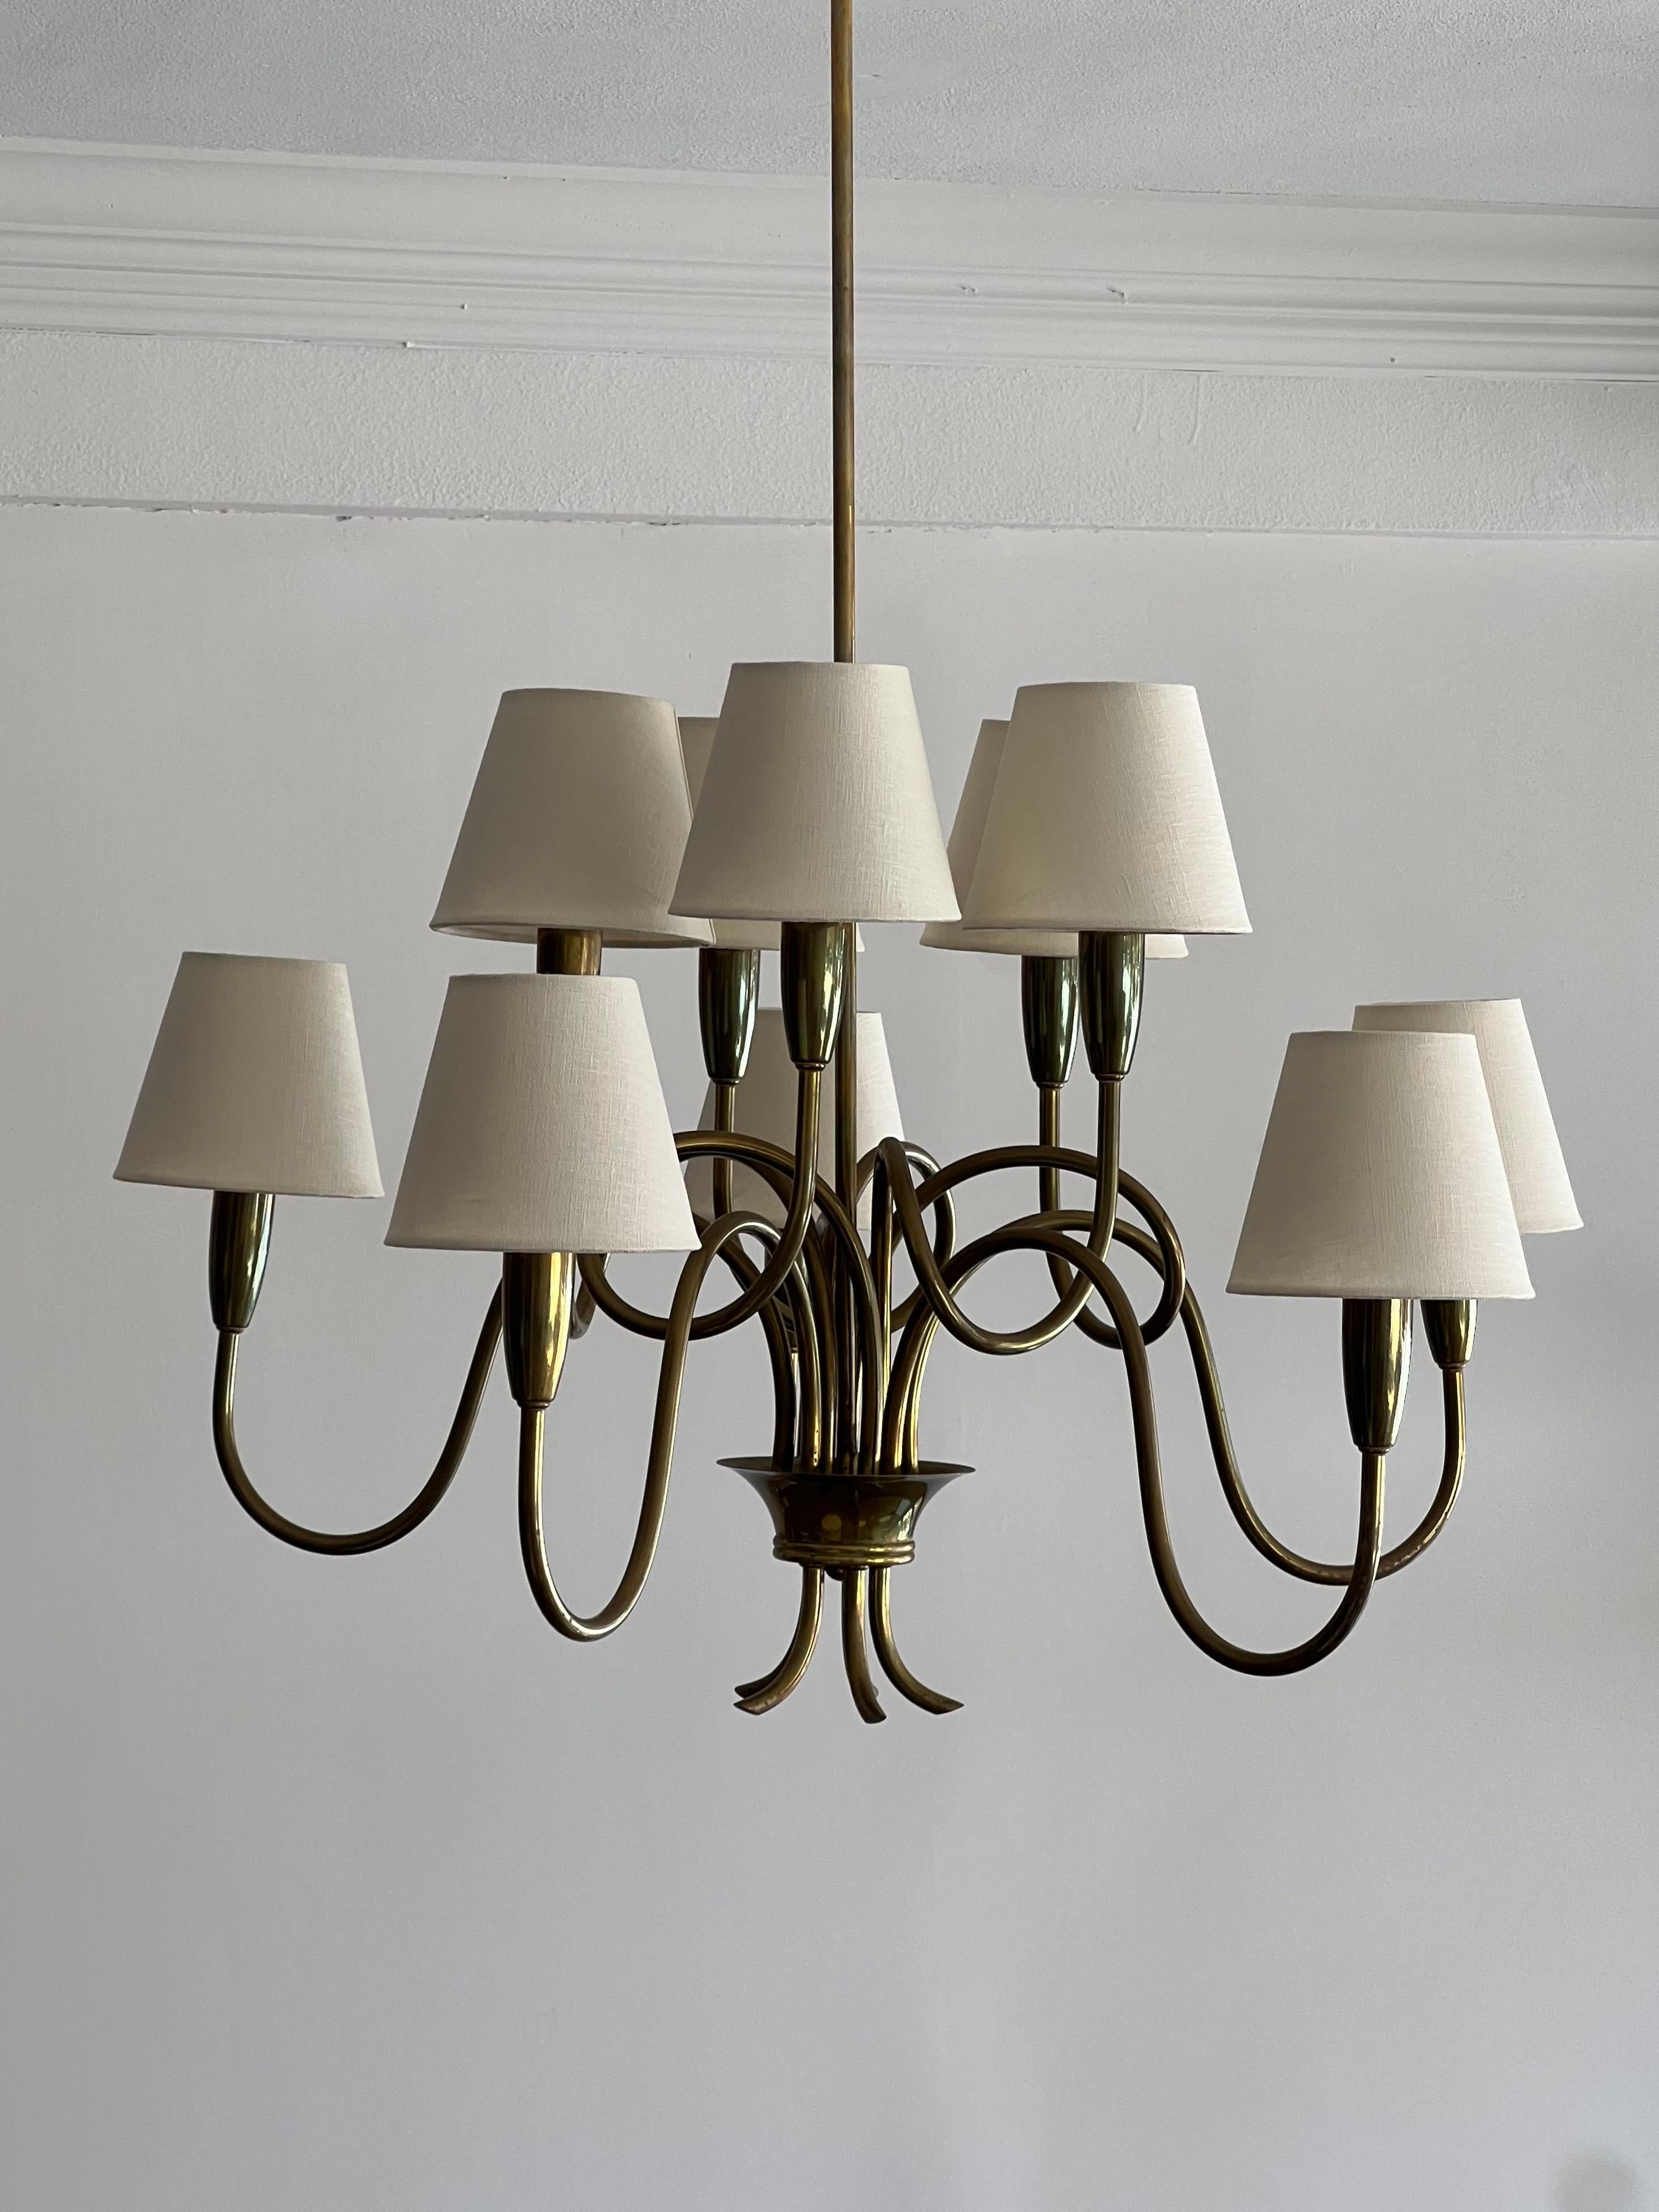 A chandelier light designed and produced in Sweden, 1940s. Features ten organically shaped arms, each mounted with a brand new lampshade.